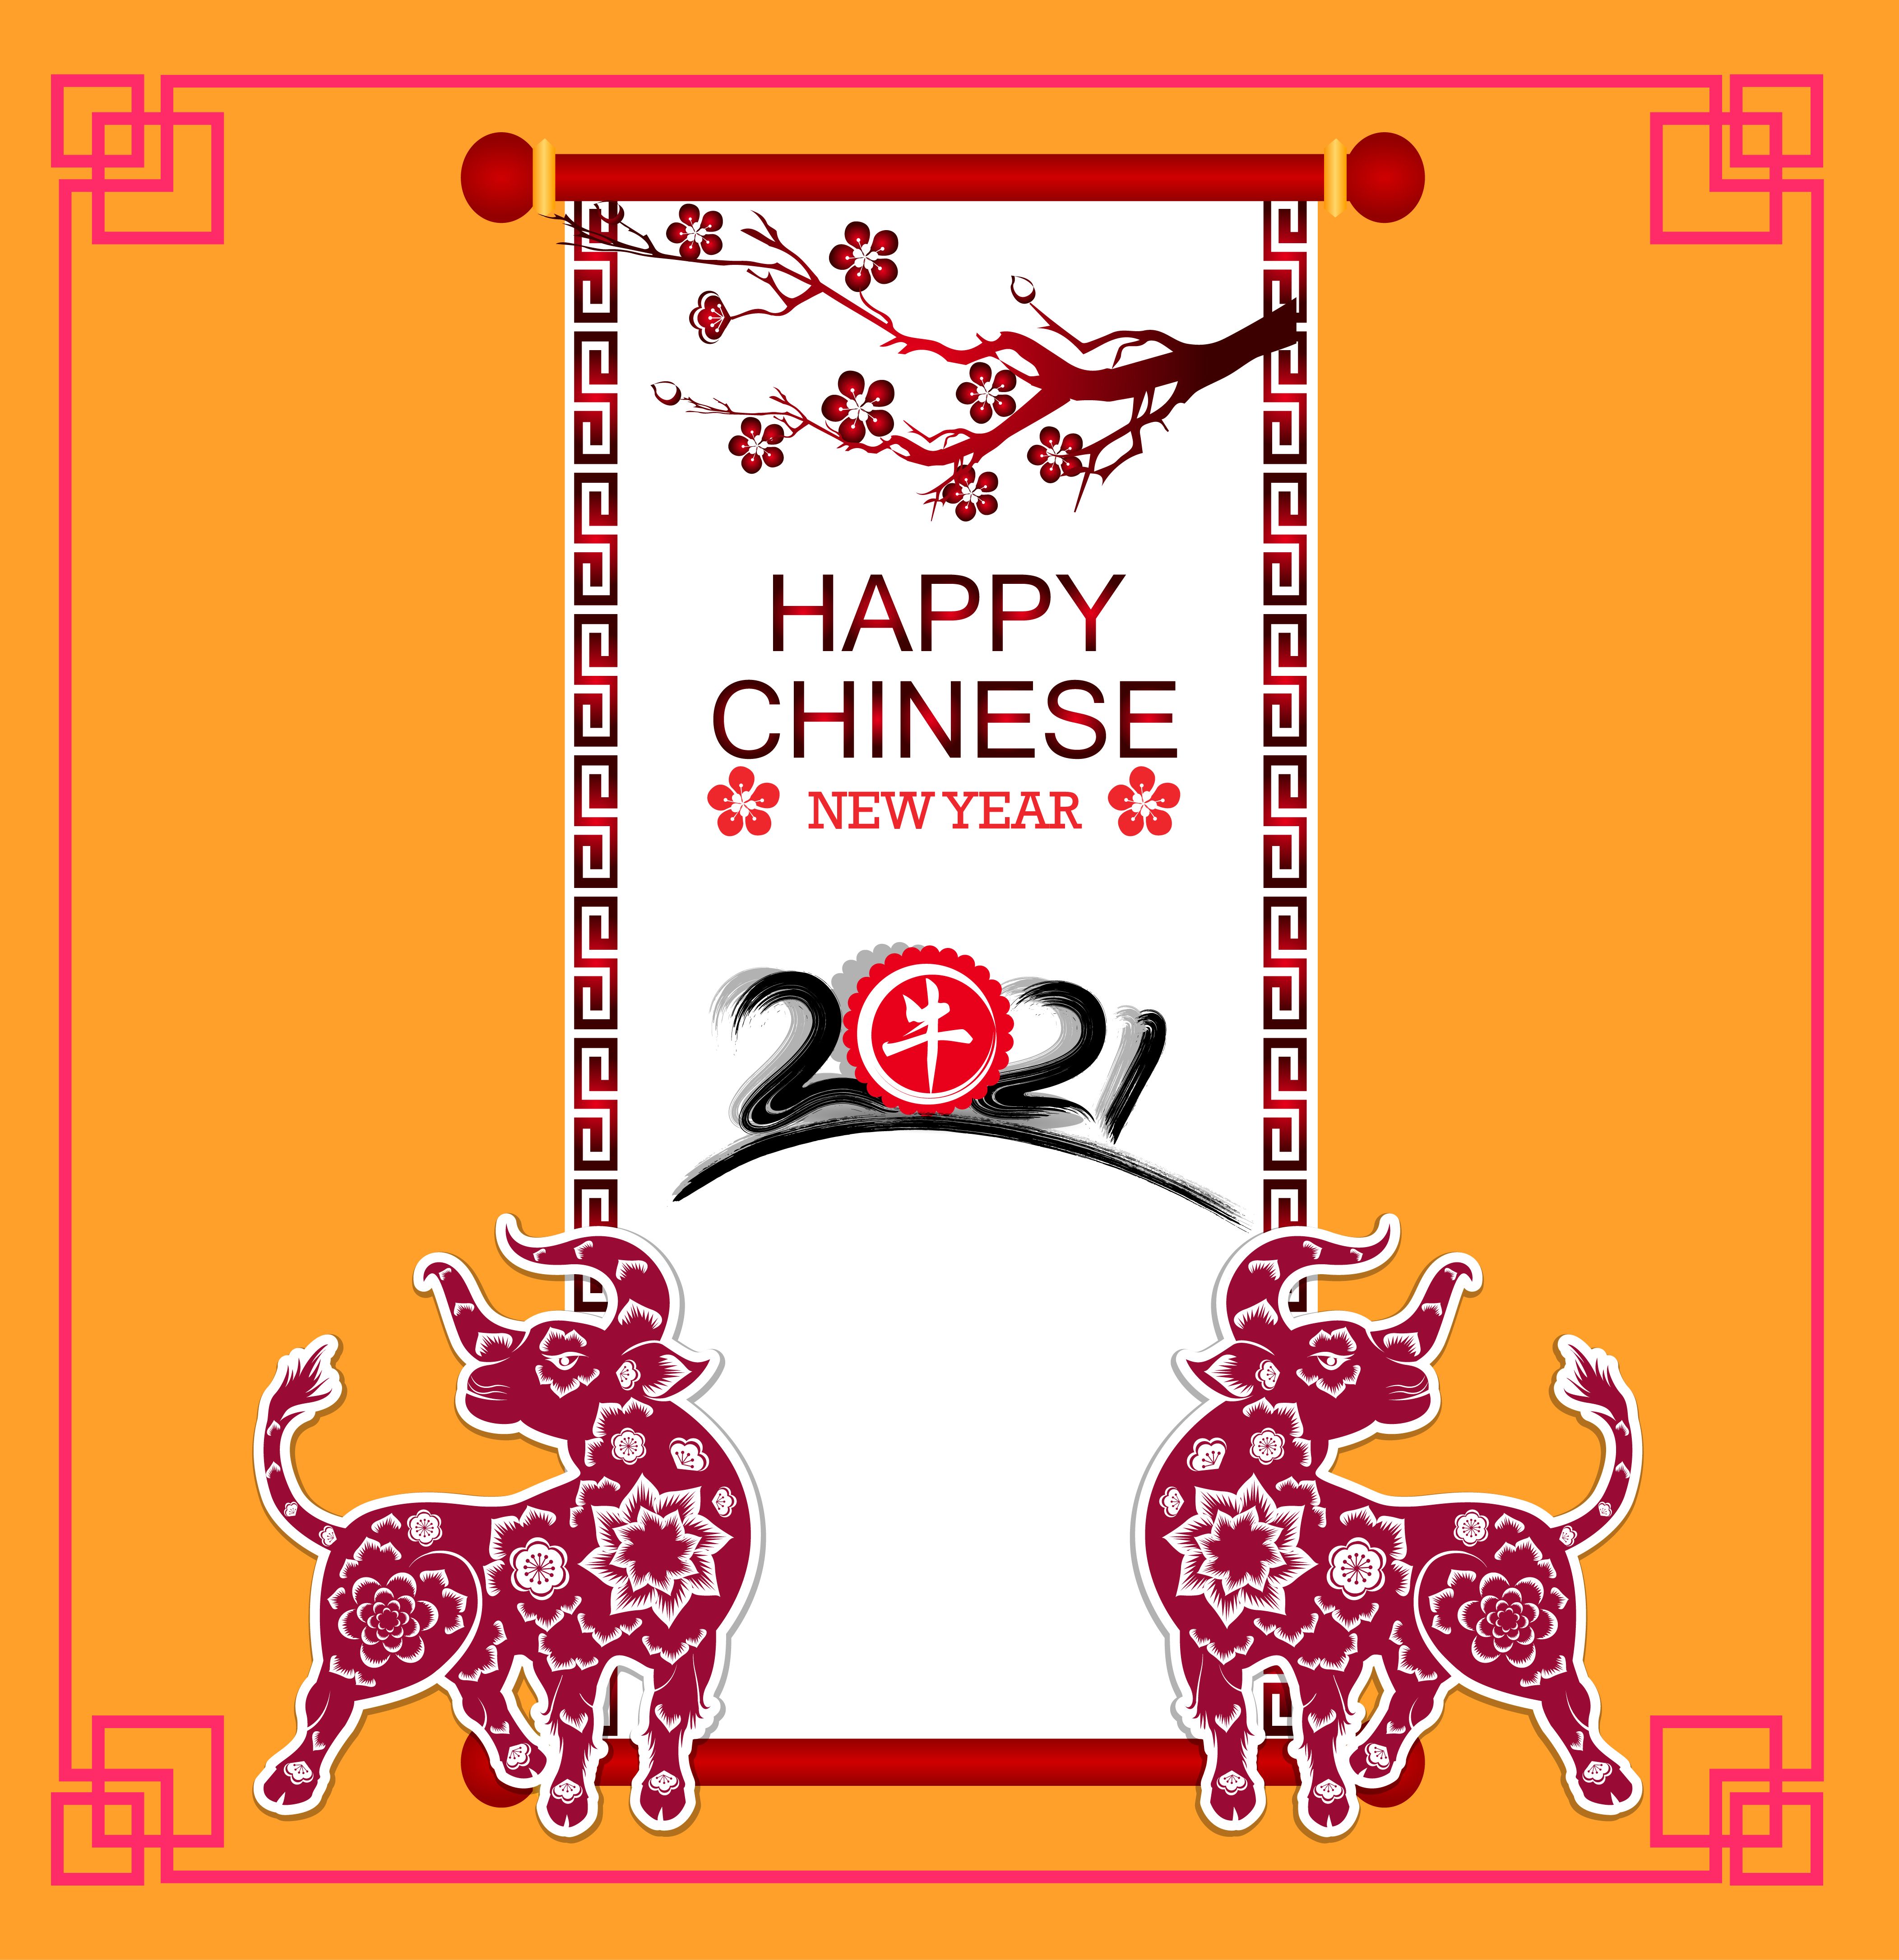 Happy chinese new year 2021 ox card .vecteezy.com